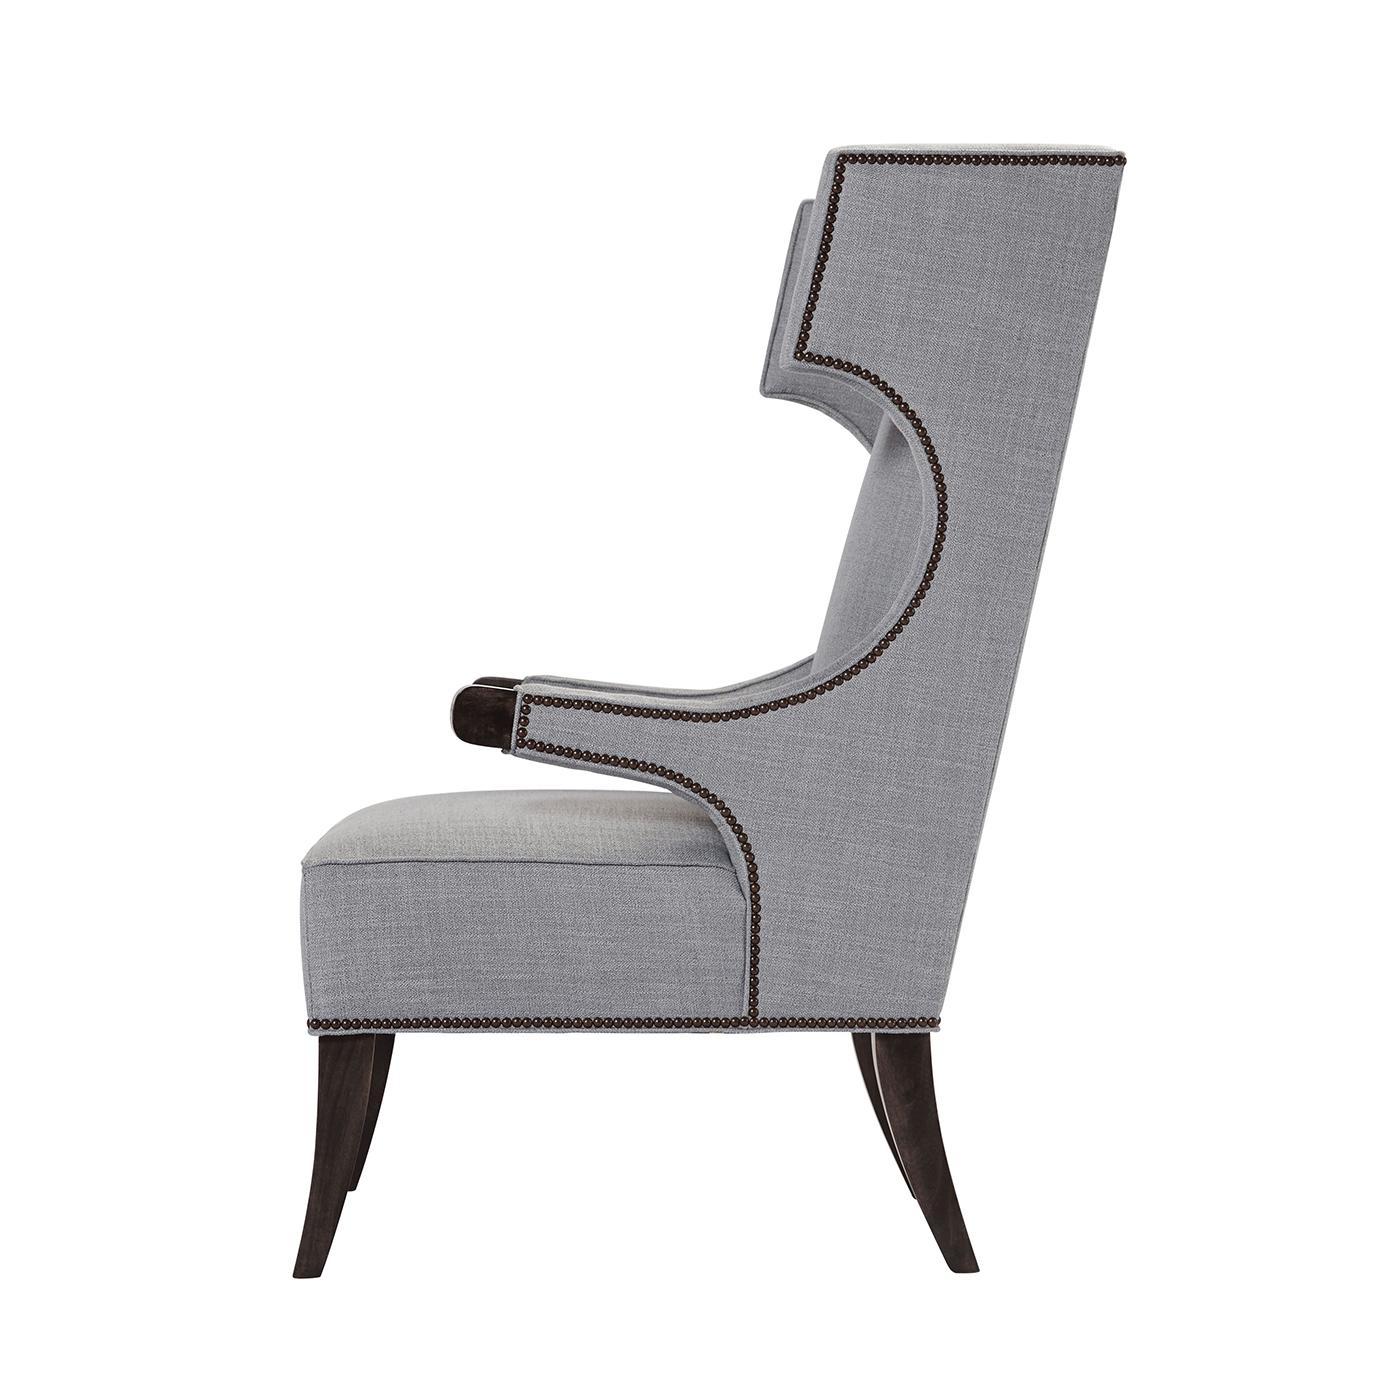 North American Midcentury Style Wingchair